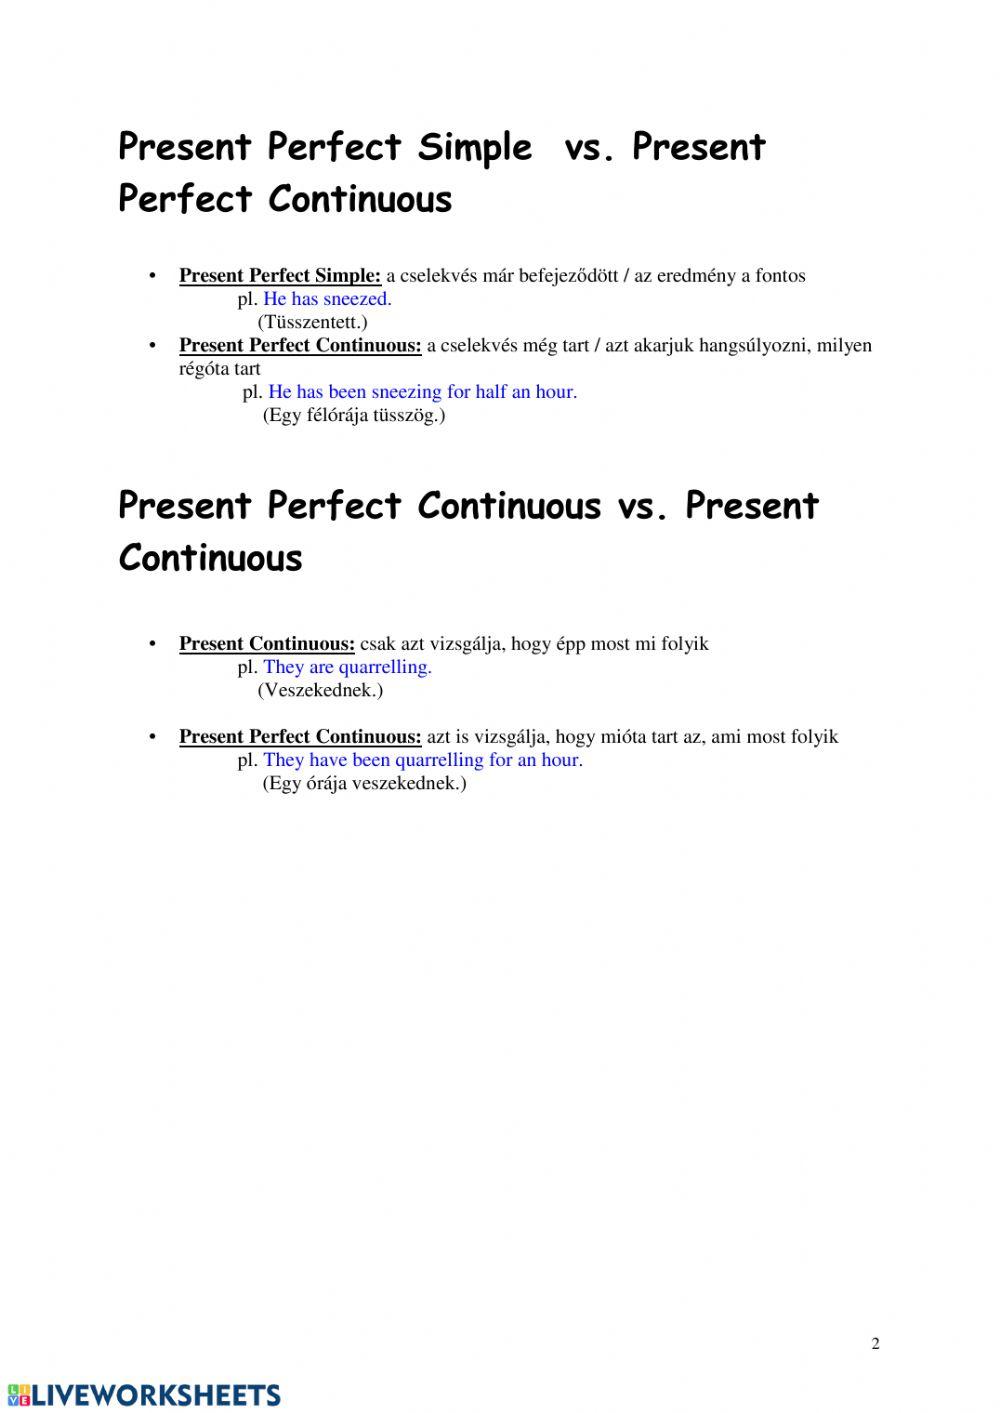 Present Perfect Continuous - Theory